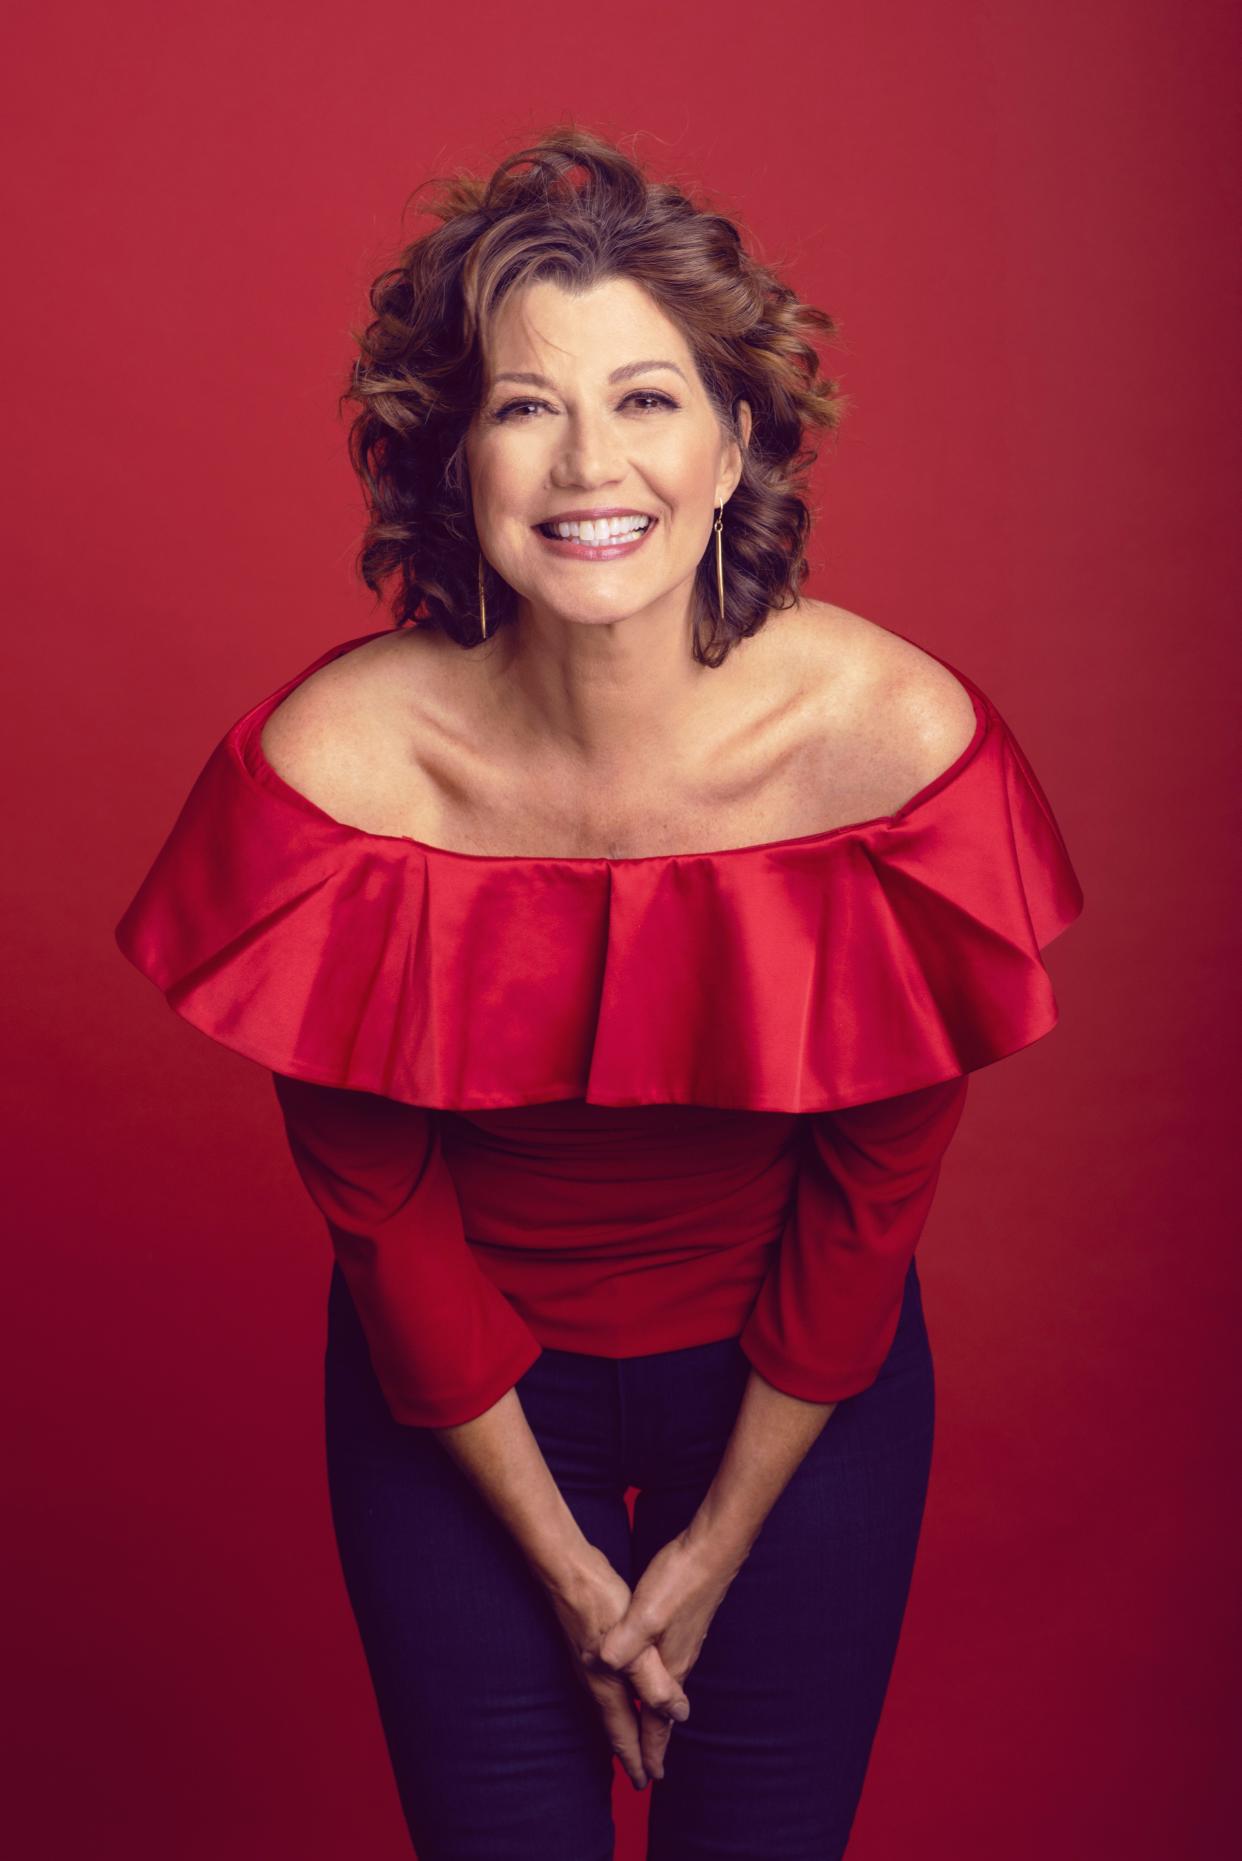 Amy Grant is performing at Juanita K. Hammons Hall for the Performing Arts on Sept. 28 at 7:30 p.m.